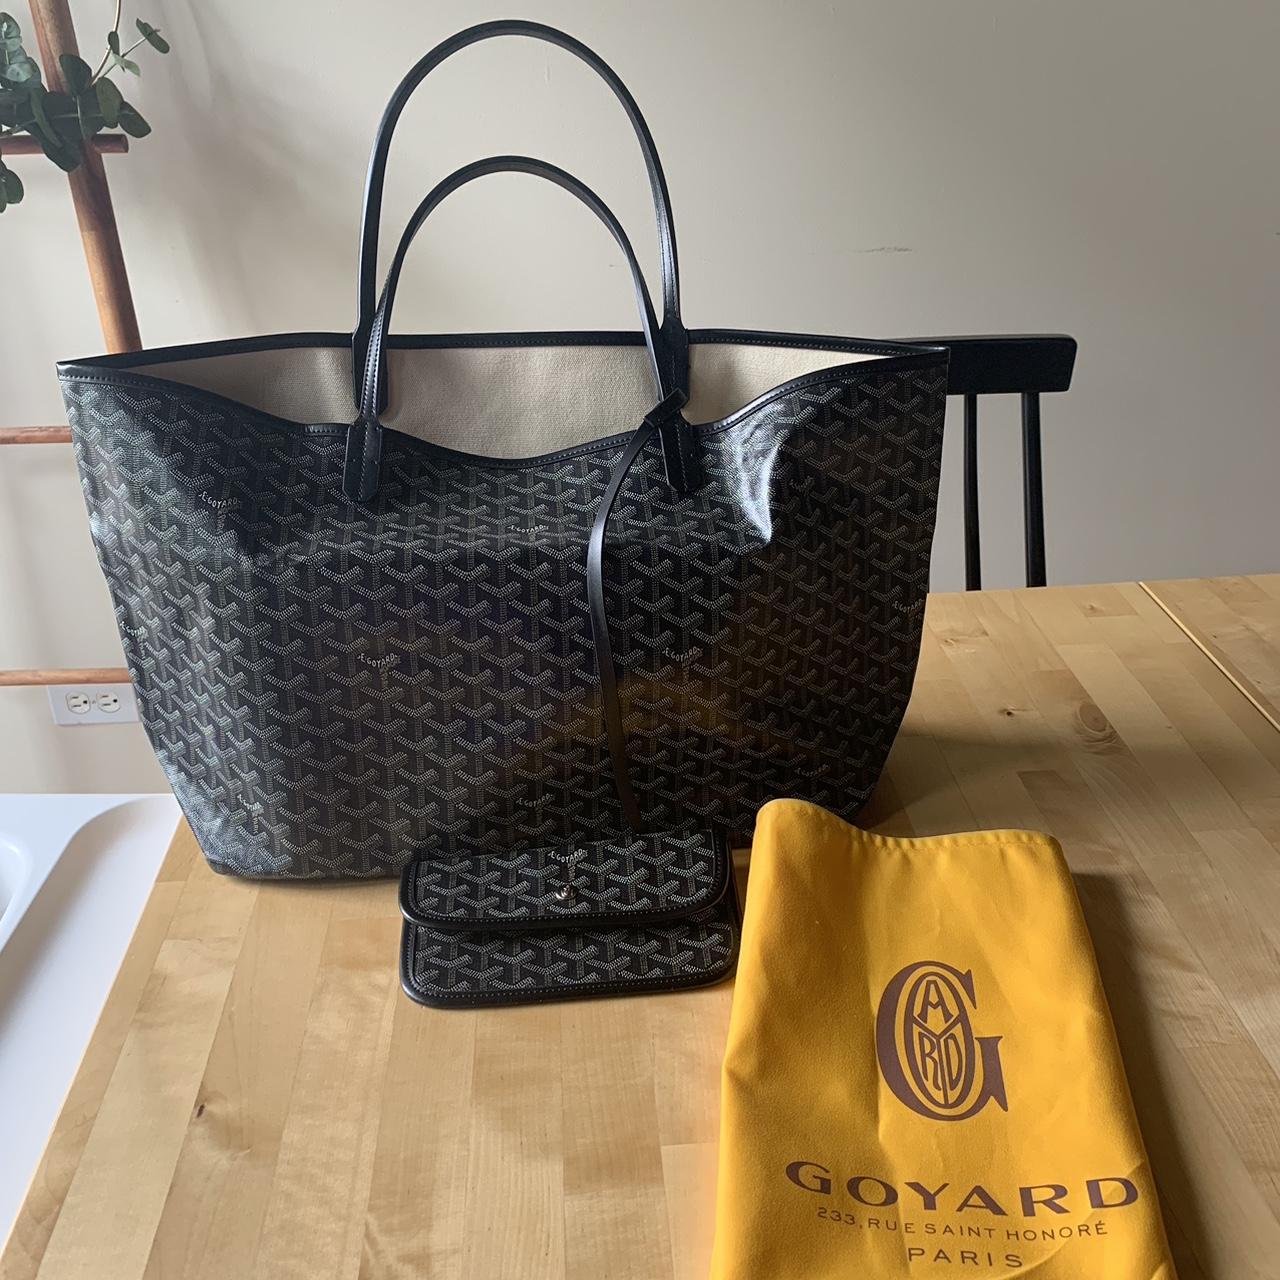 Goyard GM St. Louis Tote. Purchased second-hand. - Depop